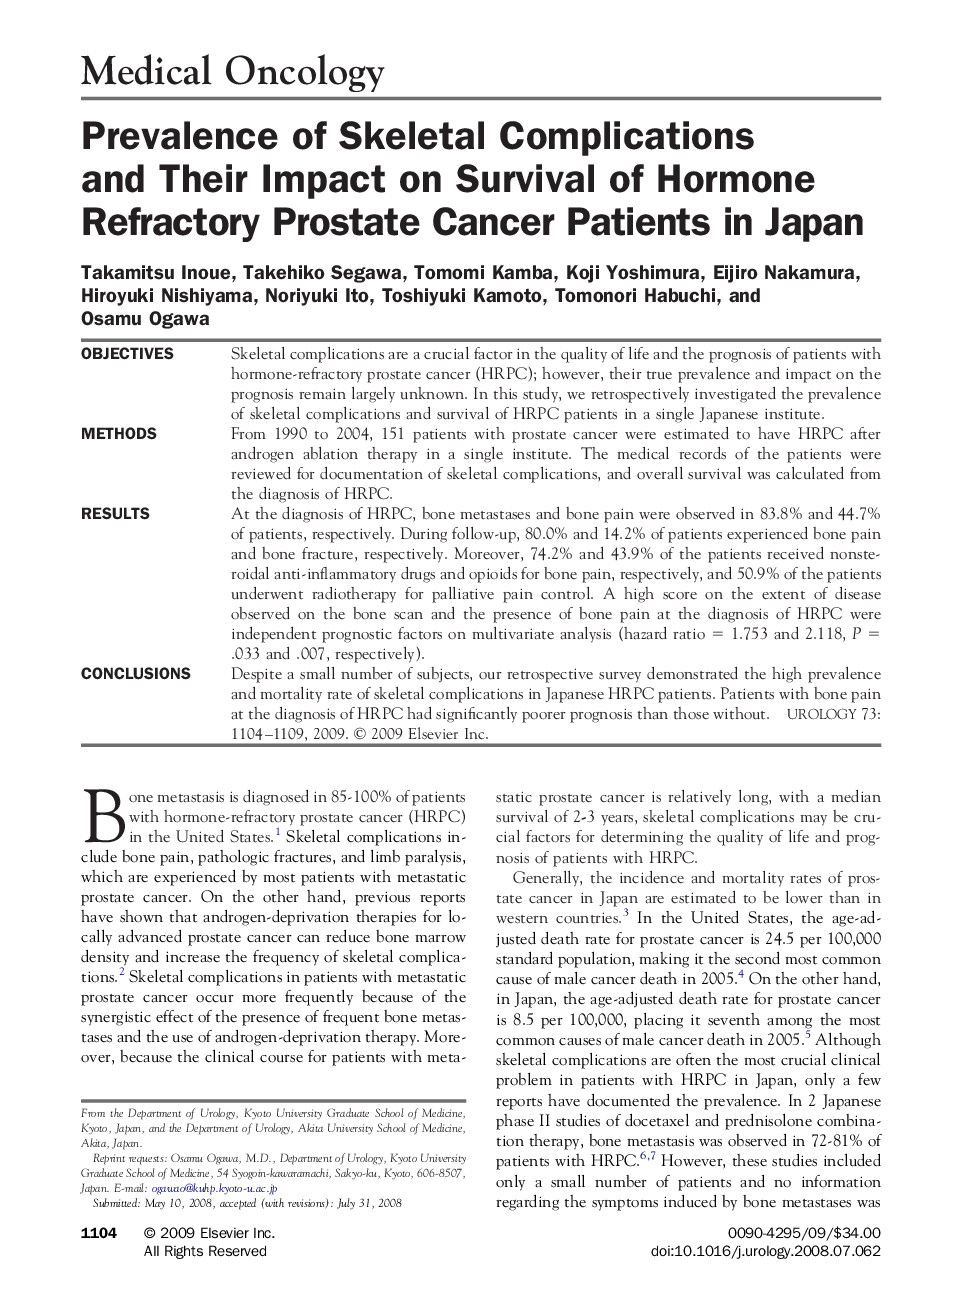 Prevalence of Skeletal Complications and Their Impact on Survival of Hormone Refractory Prostate Cancer Patients in Japan